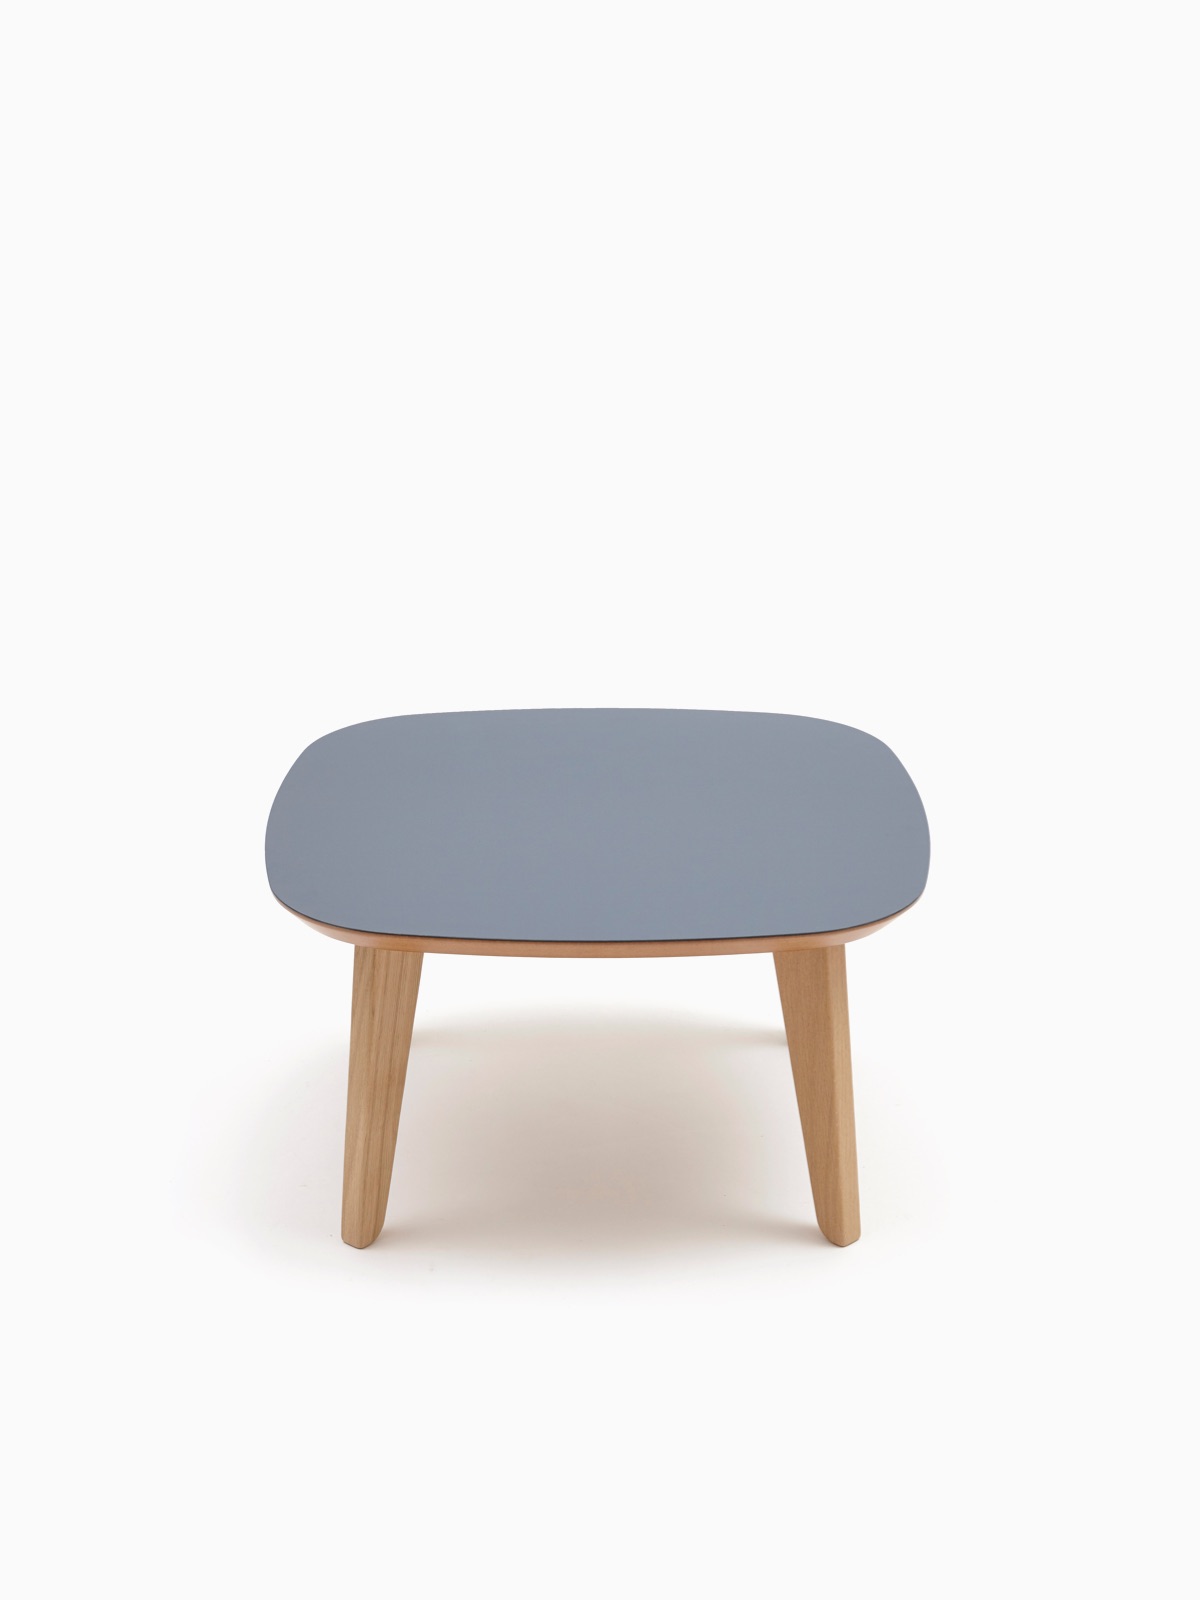 Dalby Coffee Table